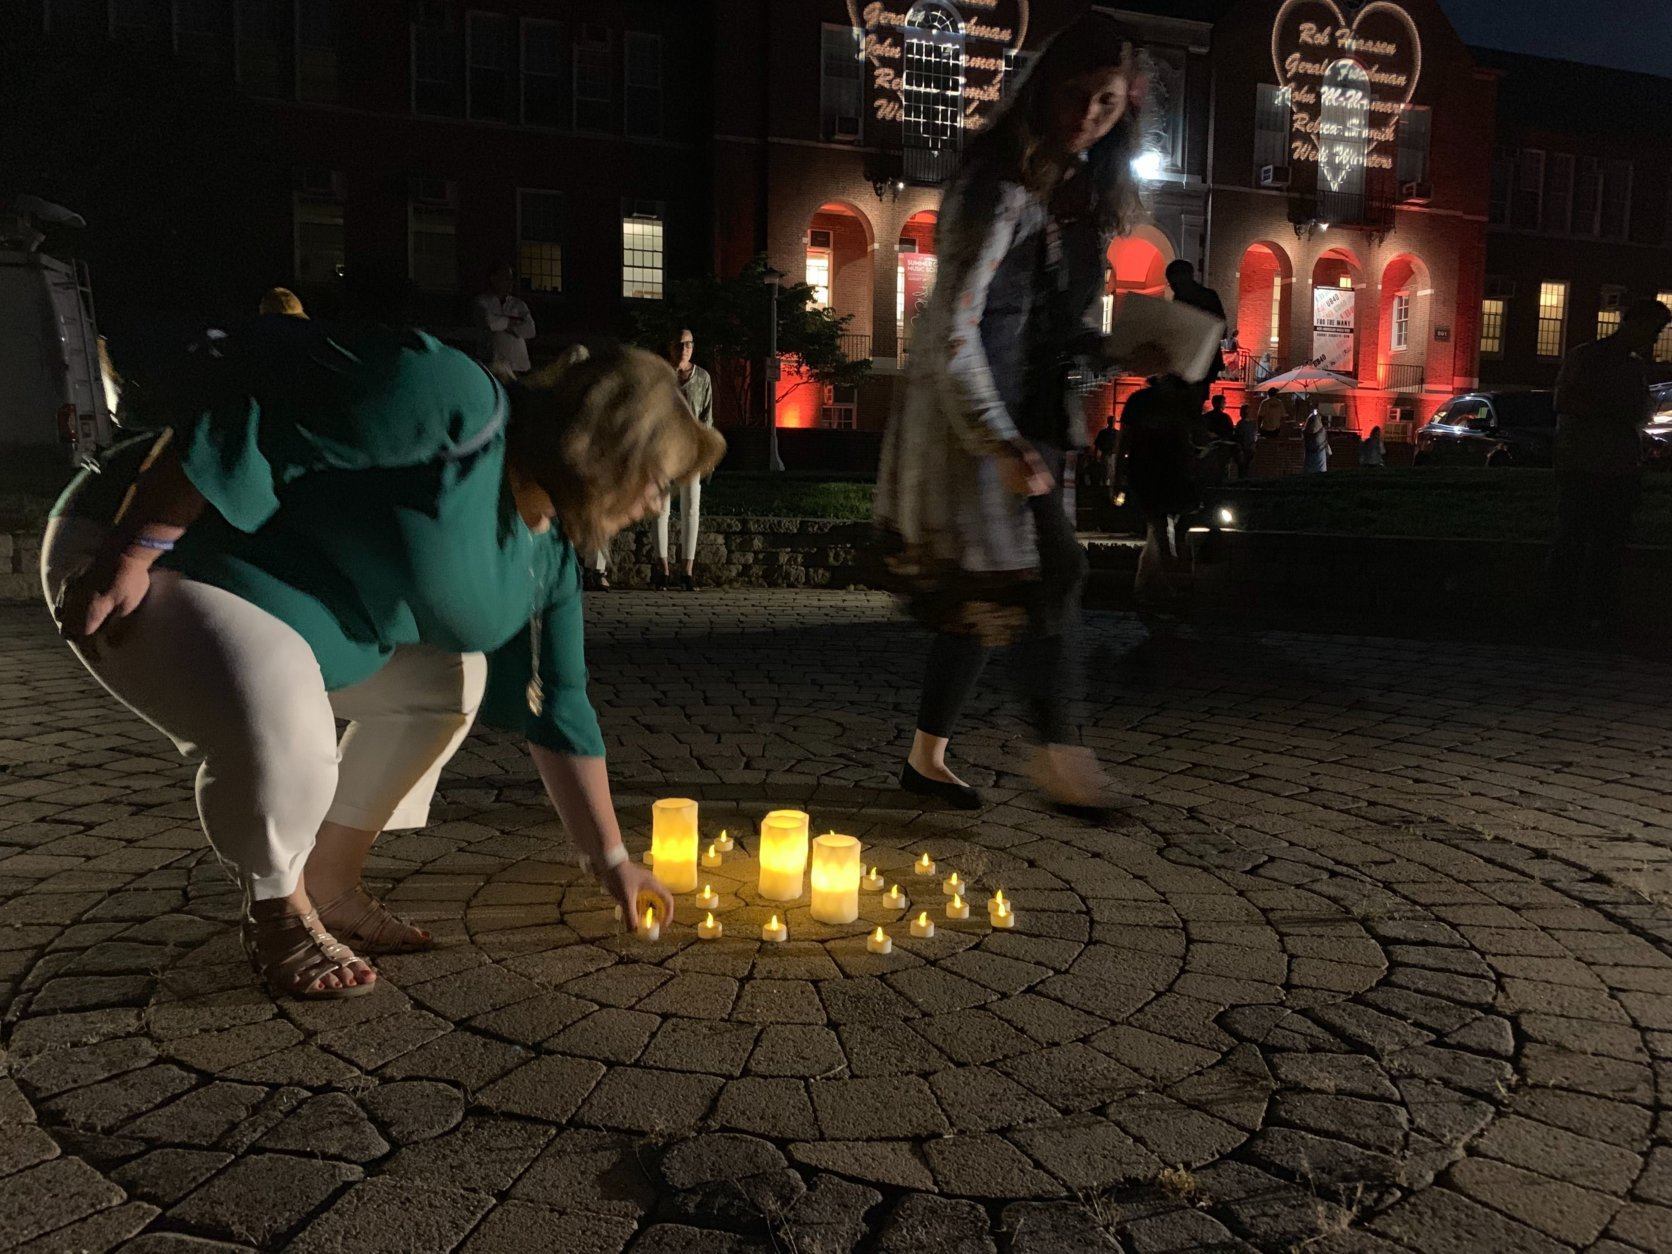 Following a memorial concert, candlelight vigil outside the Maryland Hall, in honor of the five victims of the Capital Gazette shooting. (WTOP/Mike Murillo)